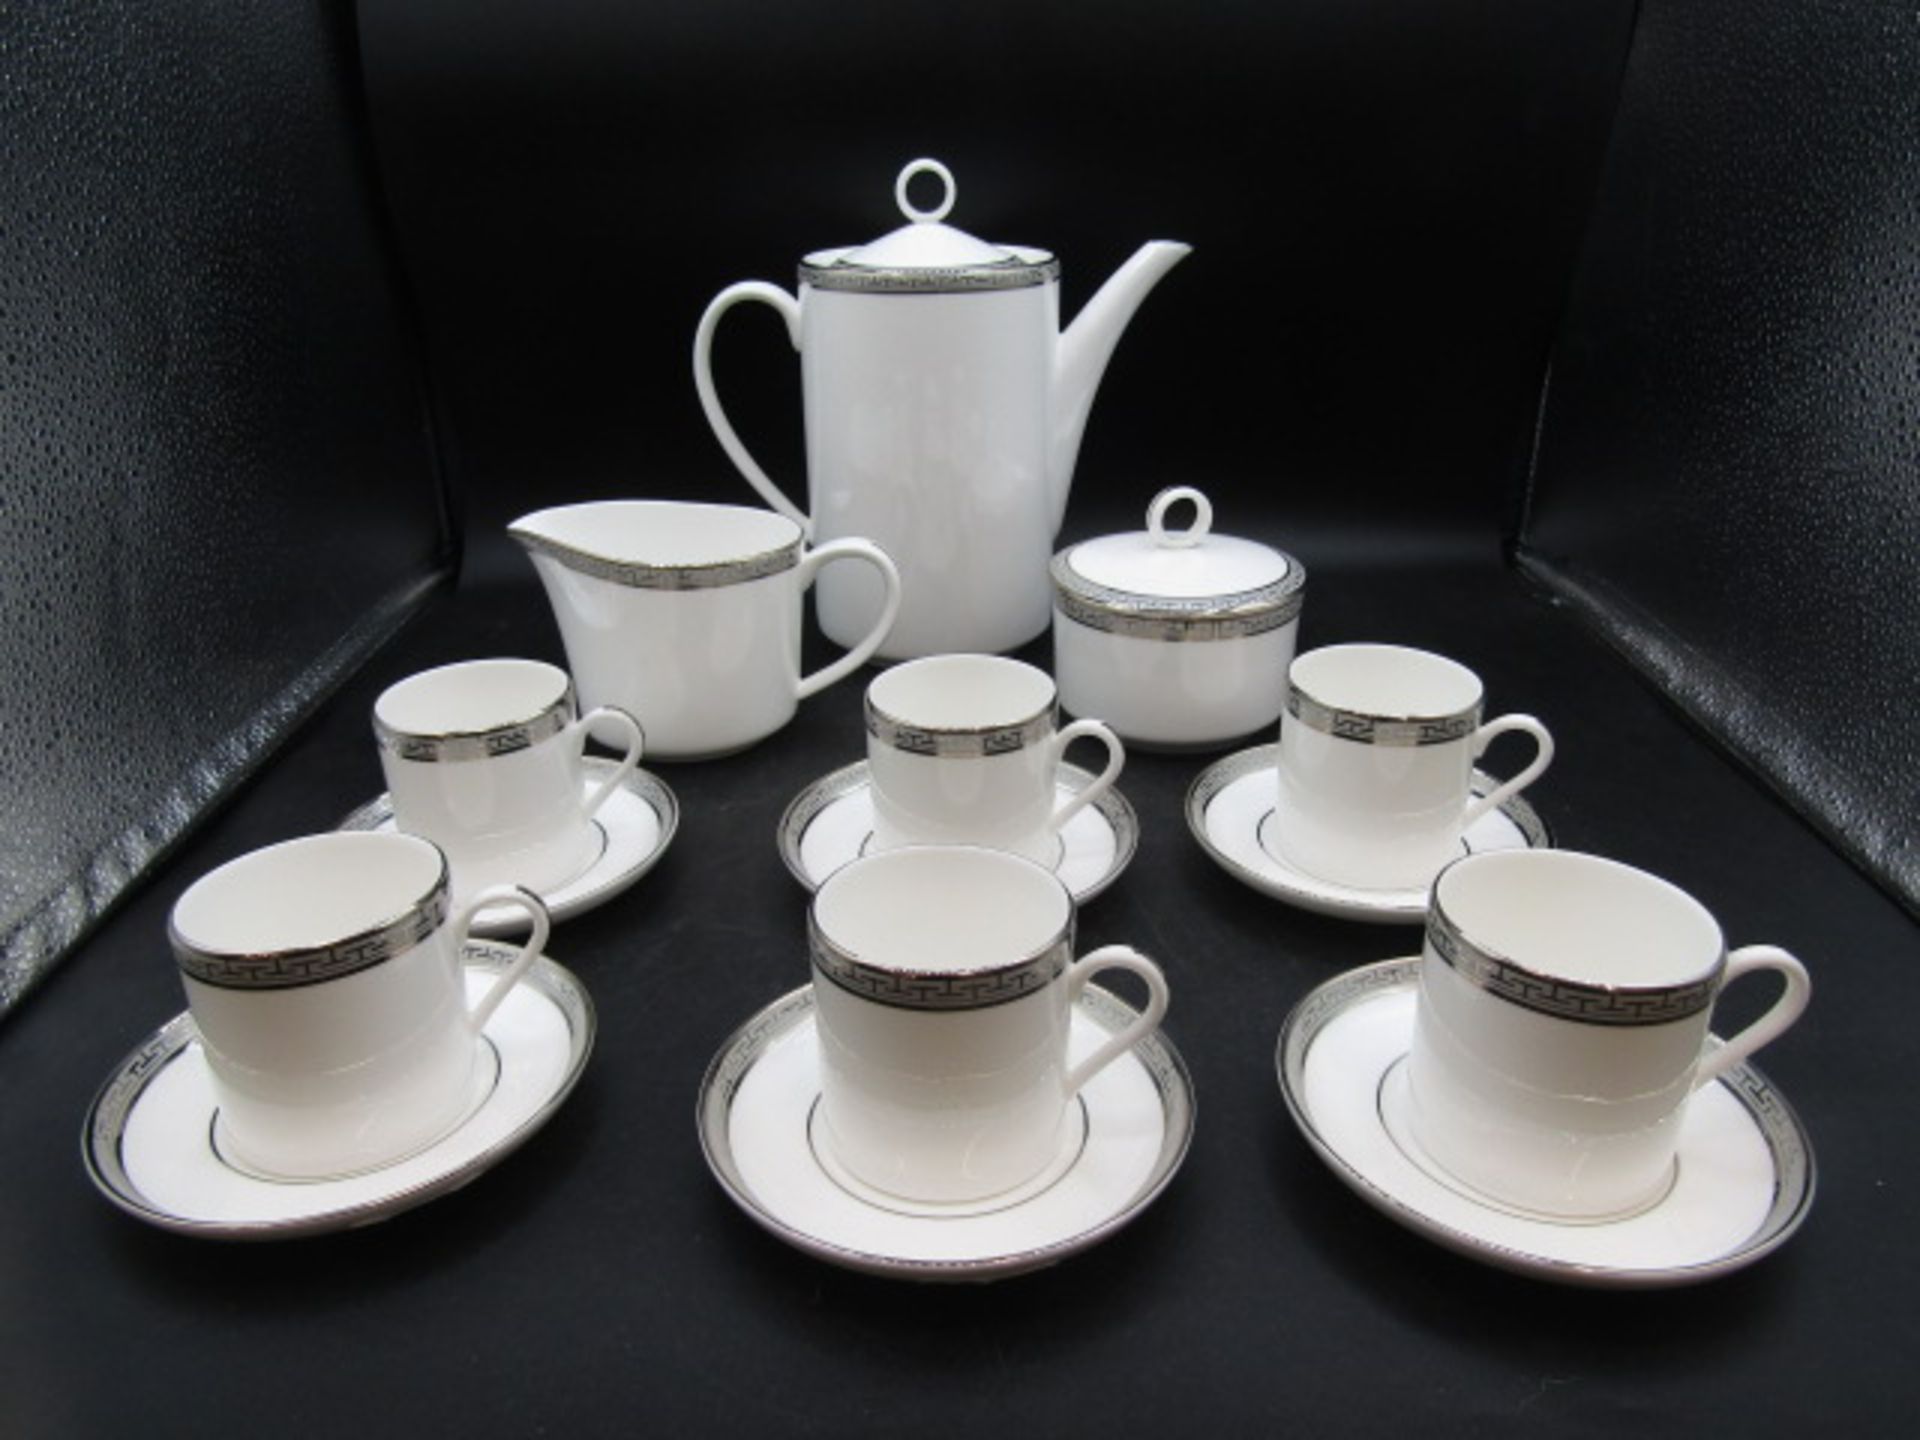 Royal Worcester coffee set, as new with boxes - Image 2 of 7